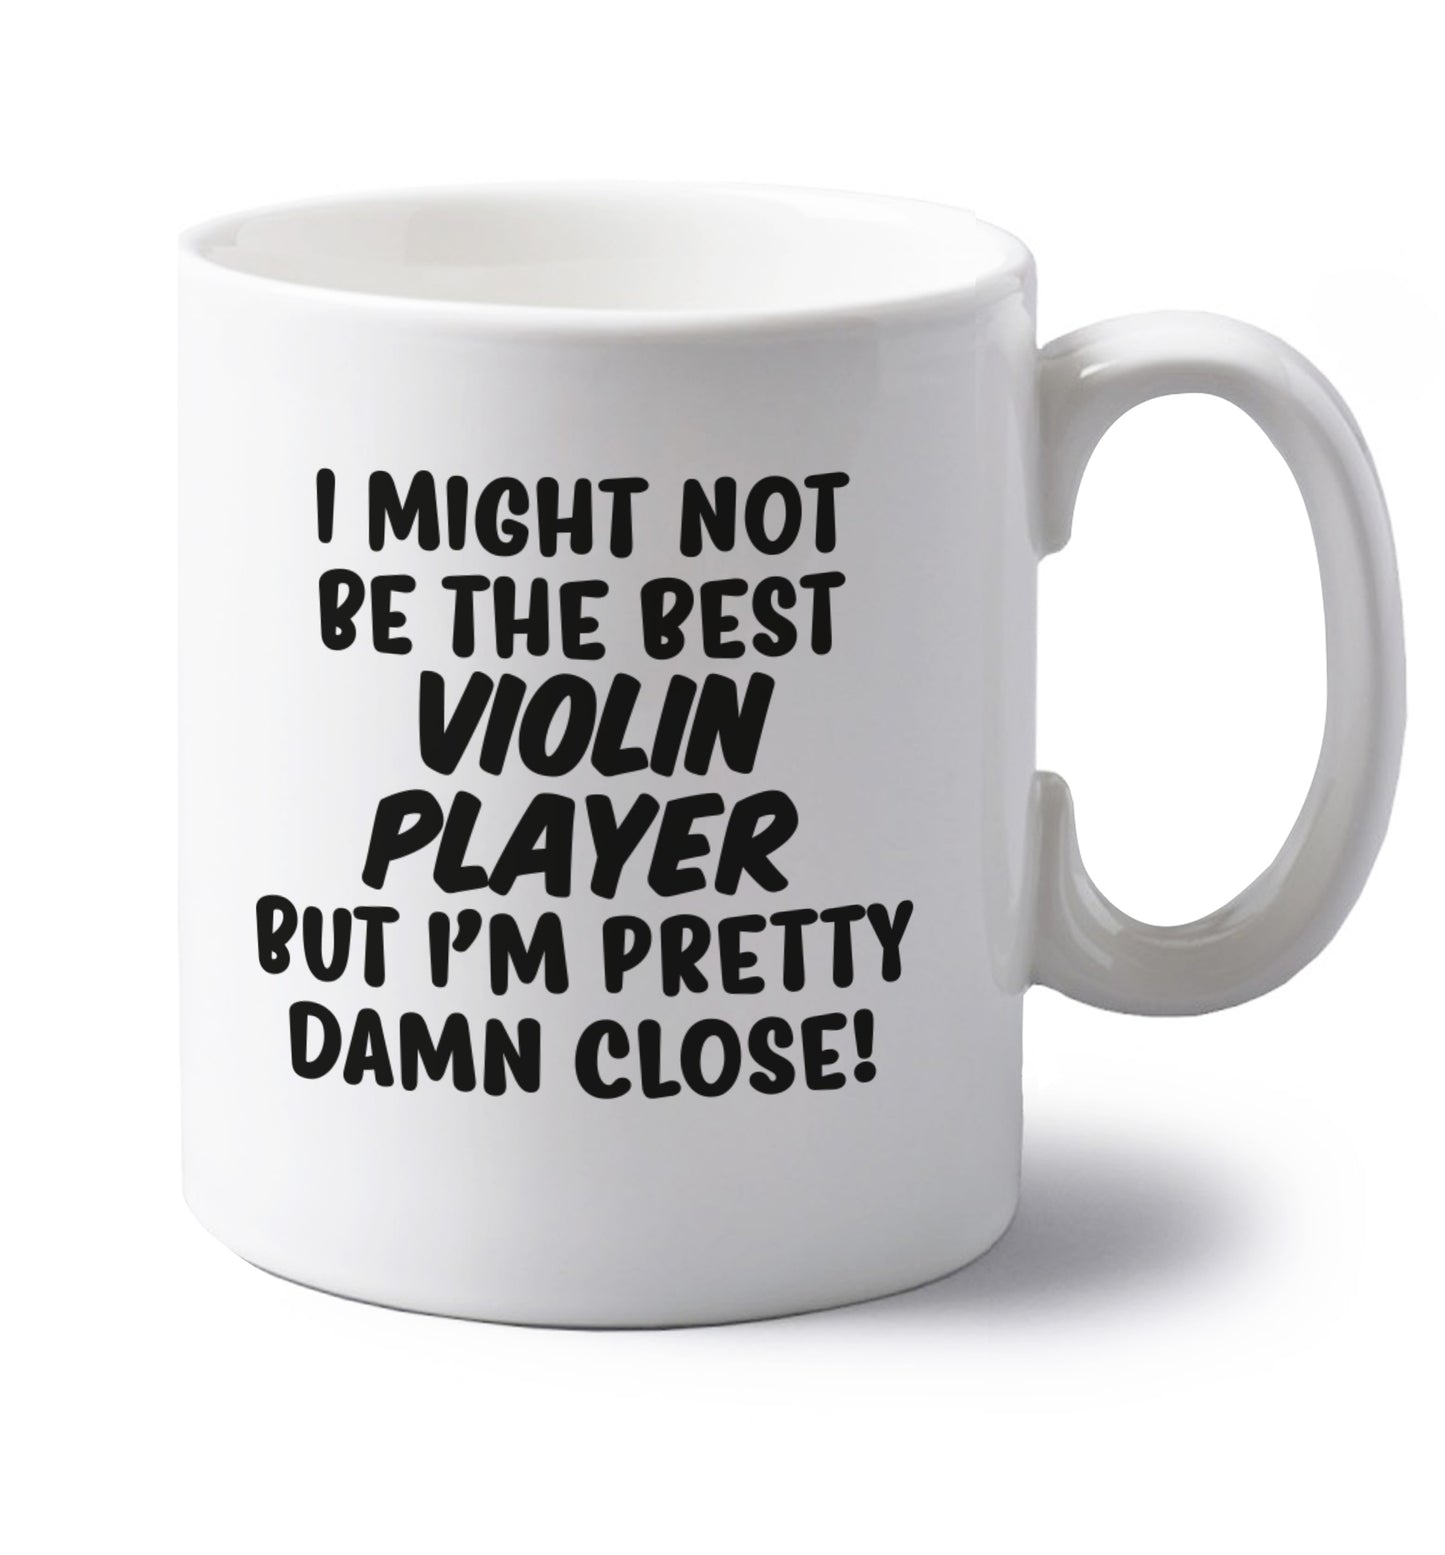 I might not be the best violin player but I'm pretty close left handed white ceramic mug 